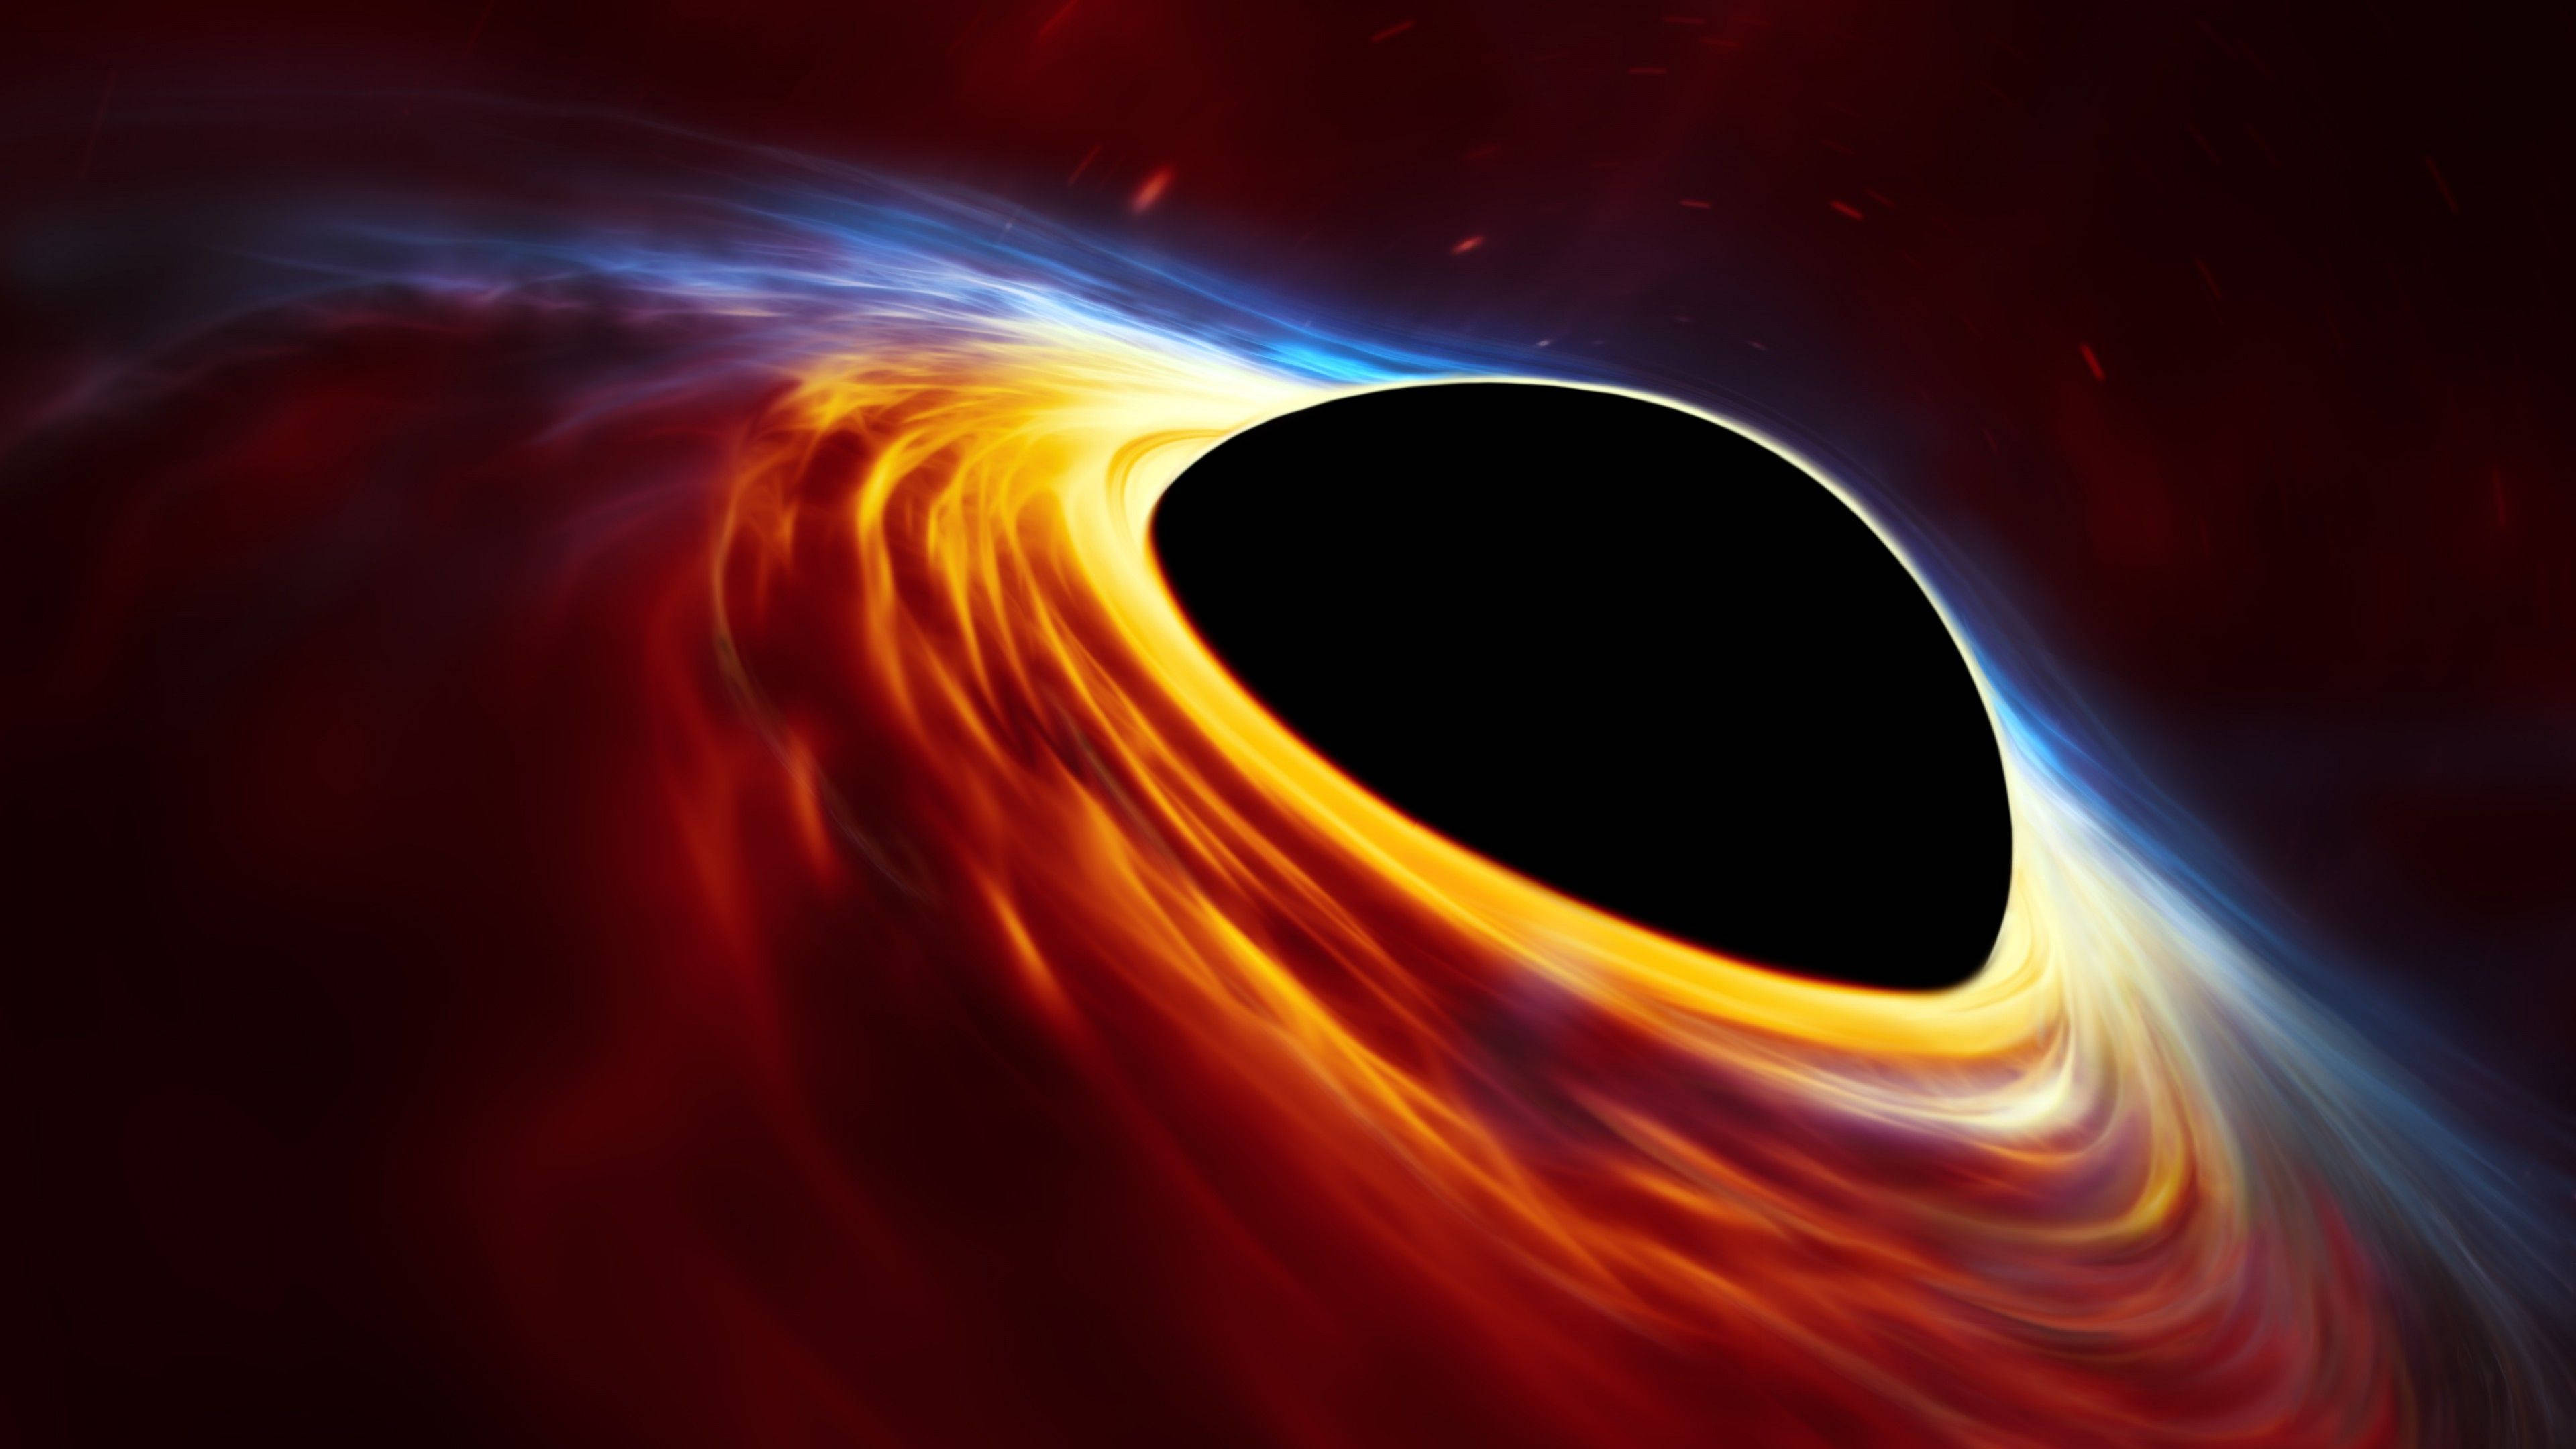 Black Hole With Blue And Red Flame Background